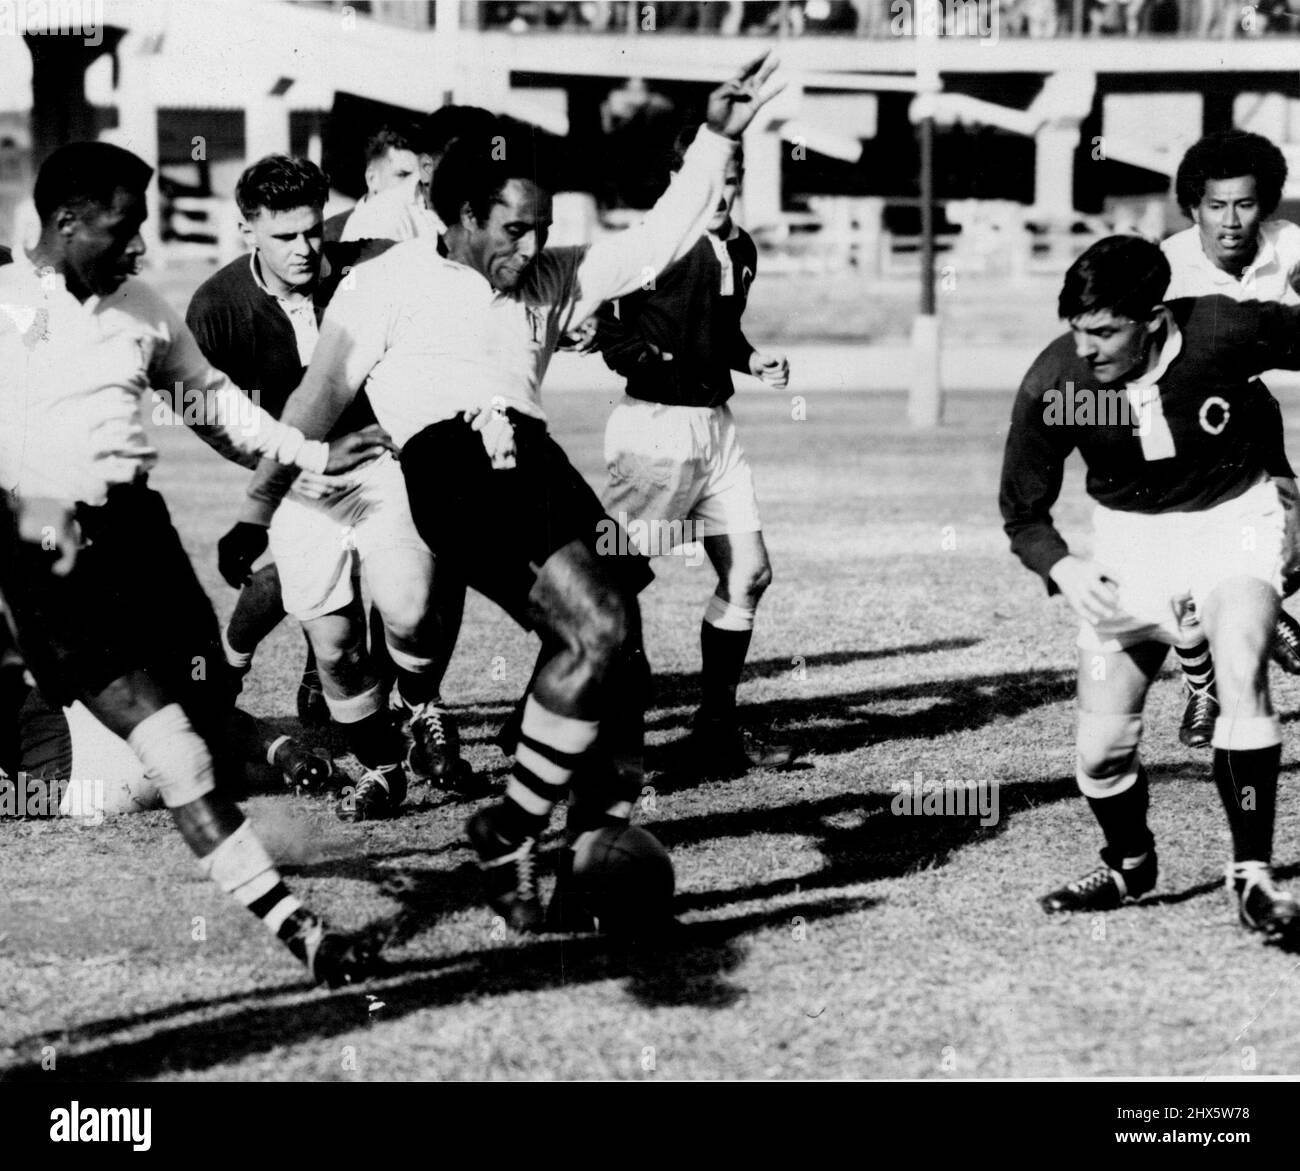 Fiji V Qld. A Fijiian forward with the ball at the toe takes the play up field into Queensland territory. July 23, 1952. (Photo by The Telegraph Newspaper Co.Ltd.) Stock Photo